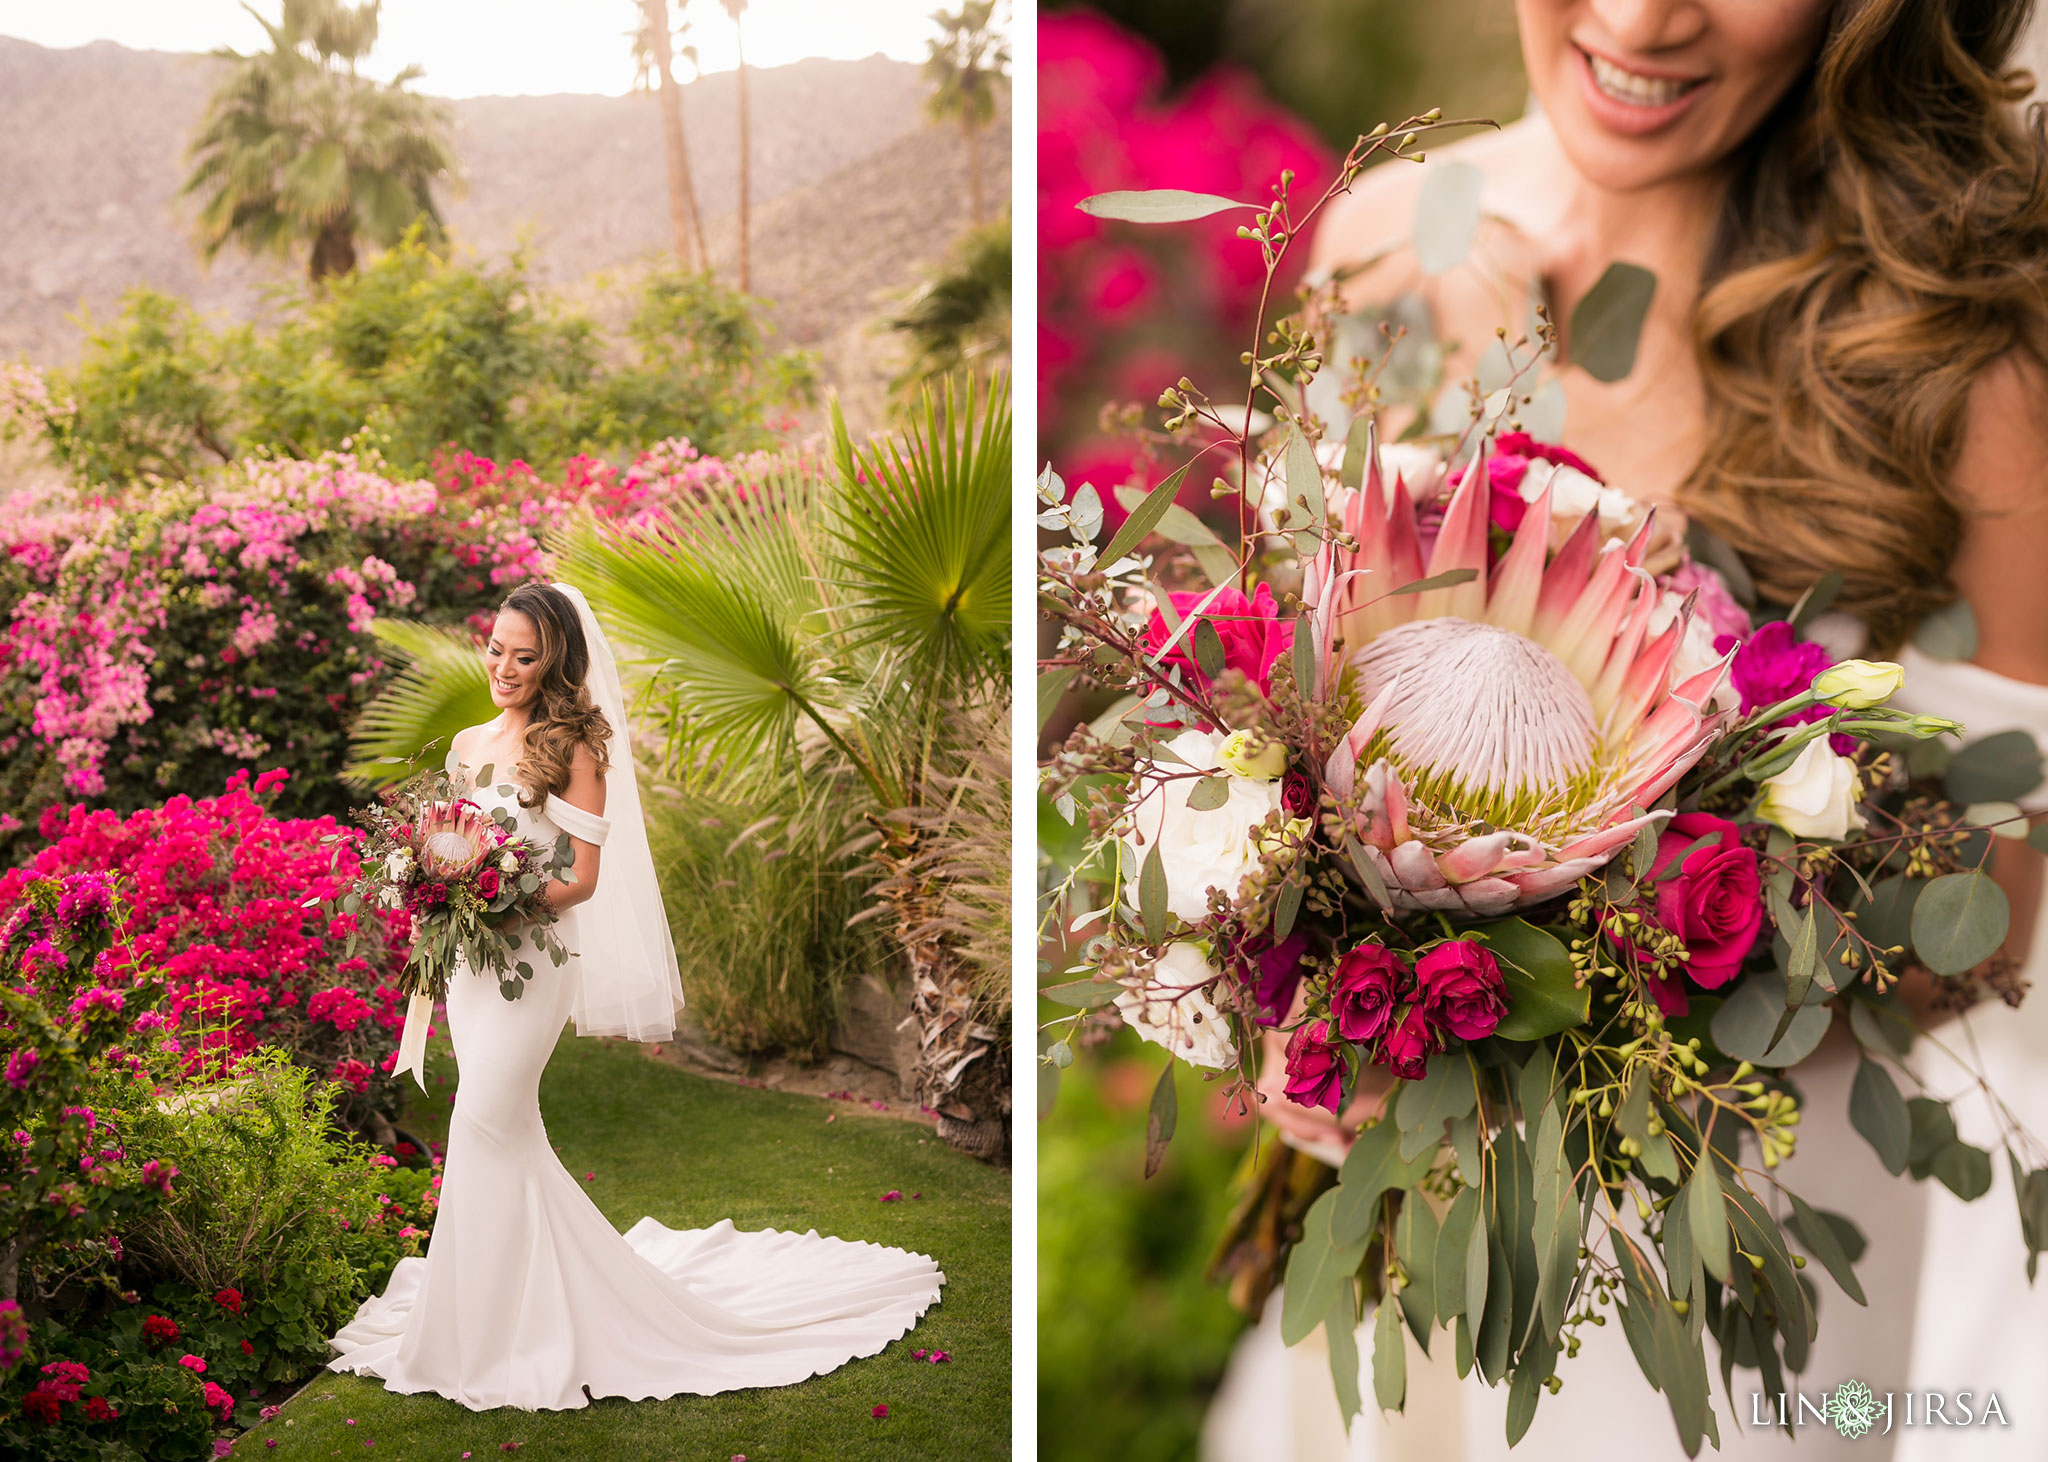 06 odonnell house palm springs bride wedding photography